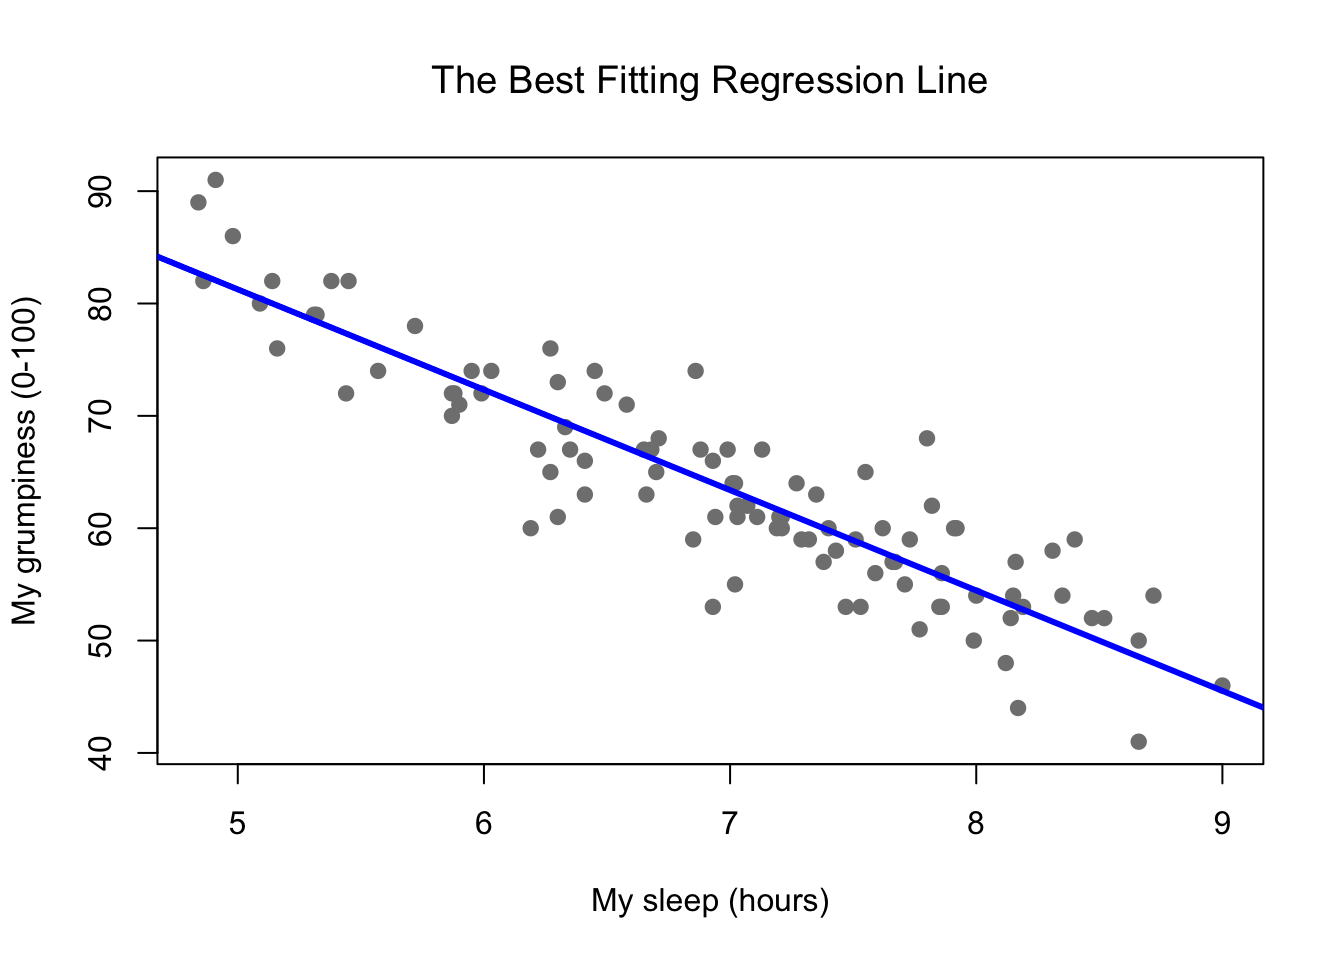 Panel a shows the sleep-grumpiness scatterplot from above with the best fitting regression line drawn over the top. Not surprisingly, the line goes through the middle of the data. 